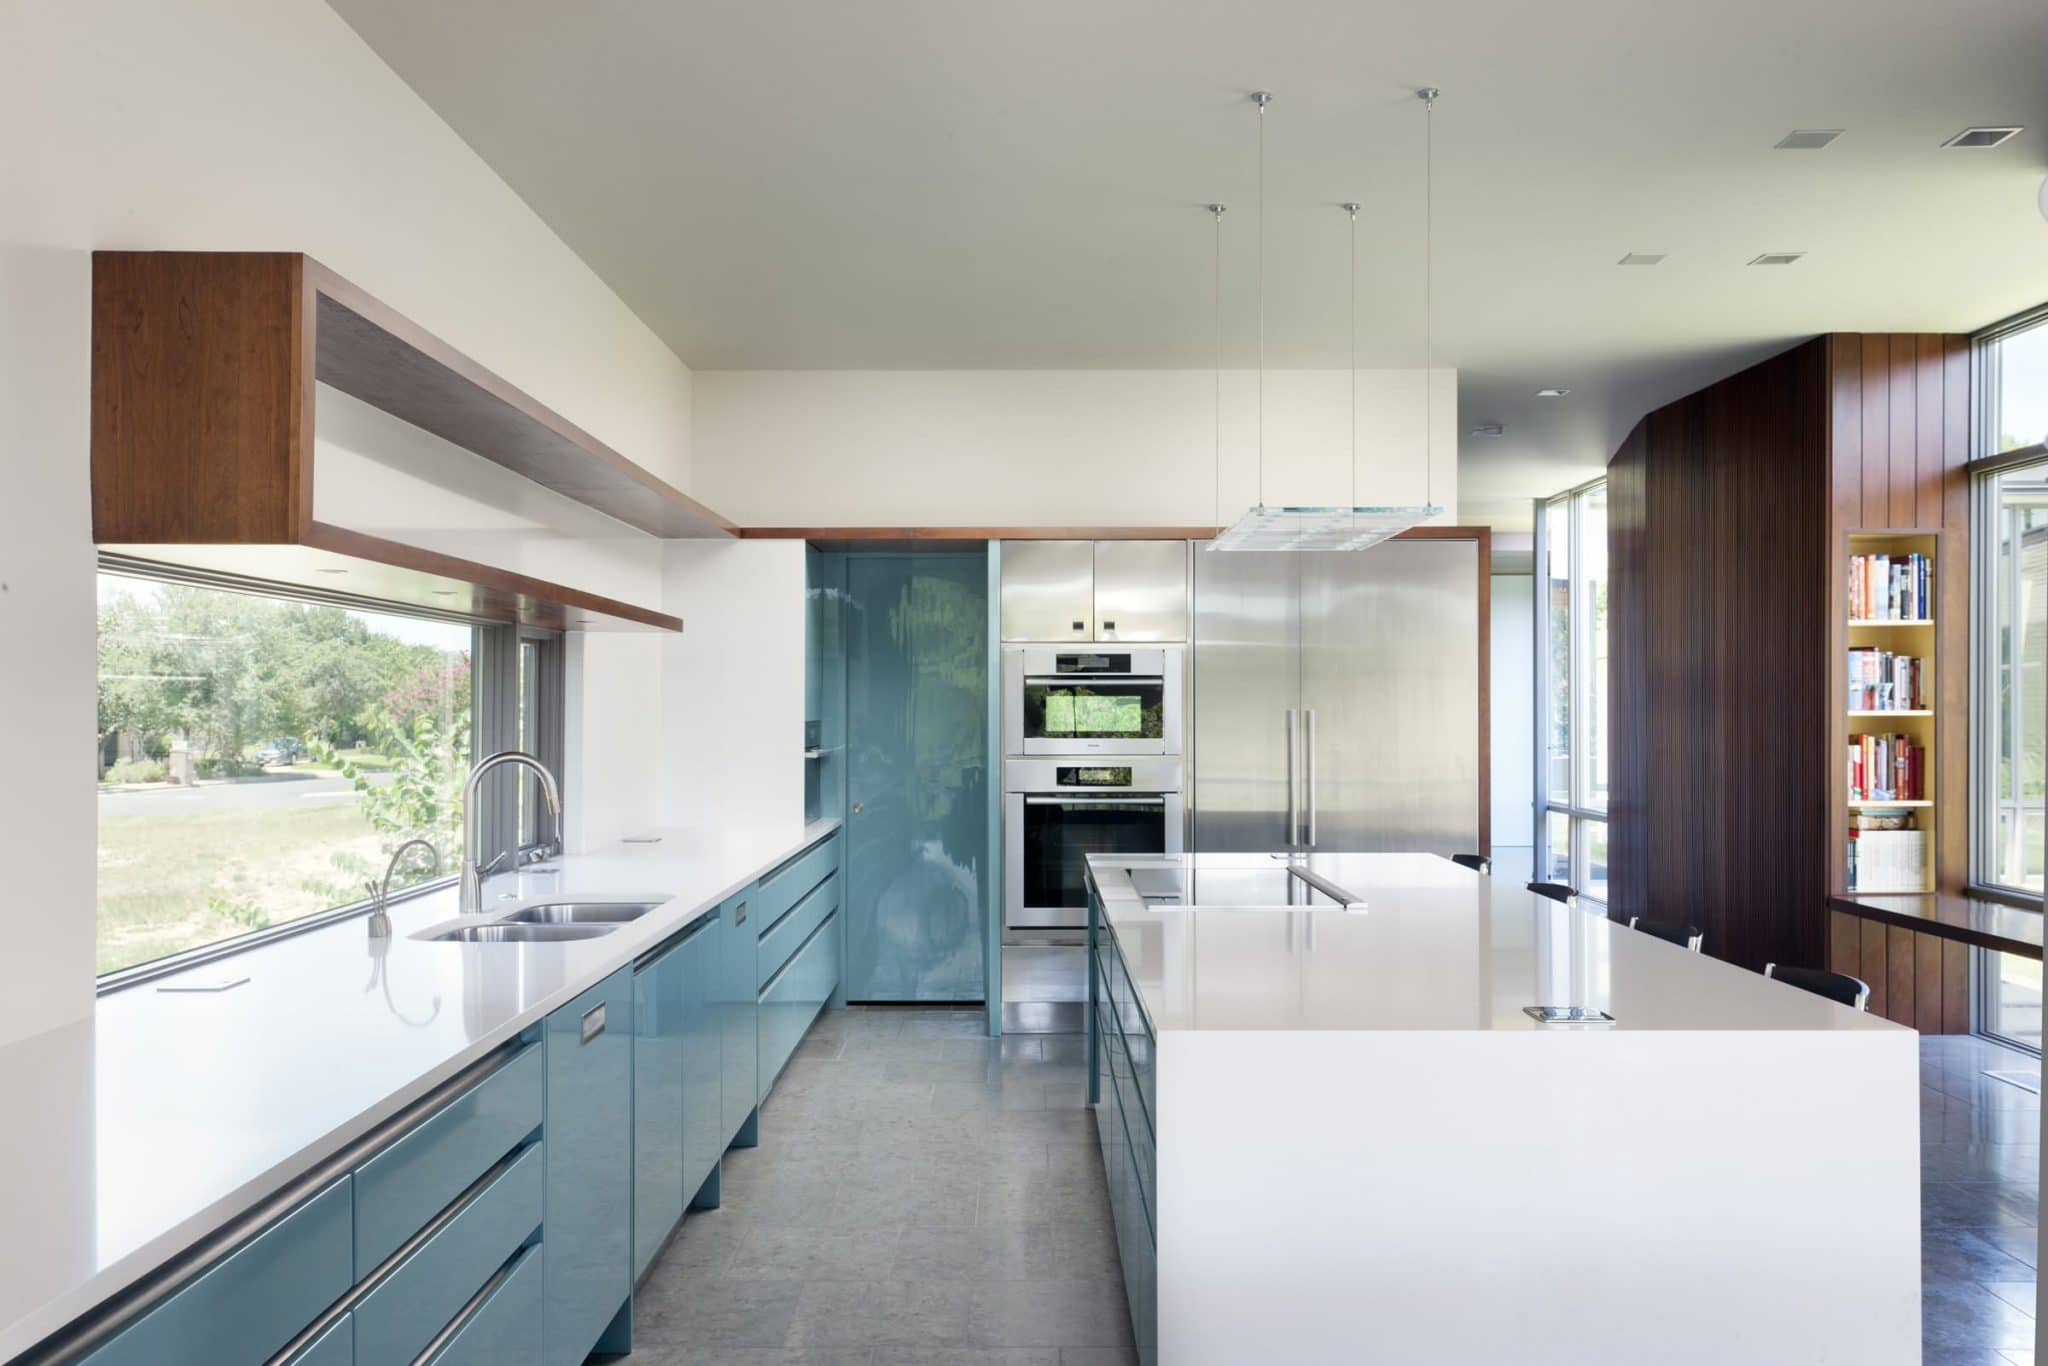 Differences Between Traditional and Modern Kitchens